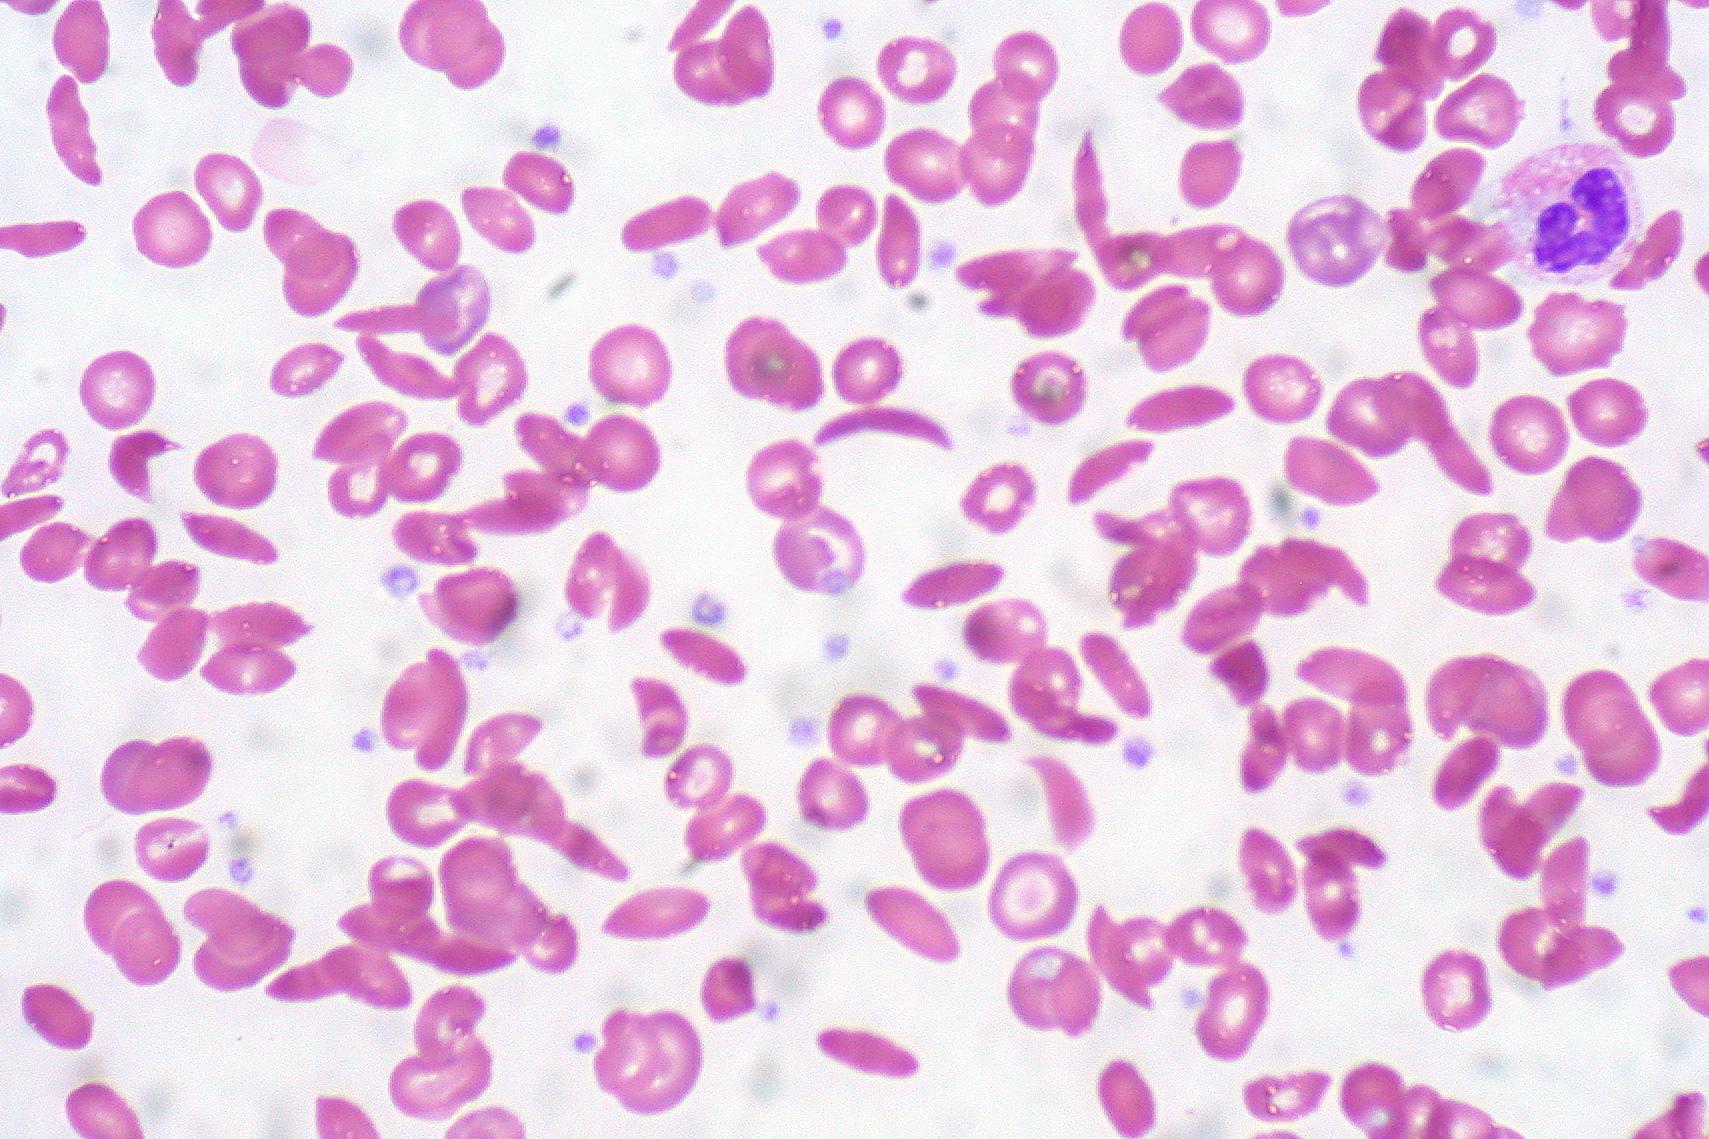 Purple-colored sickle cells over a white background